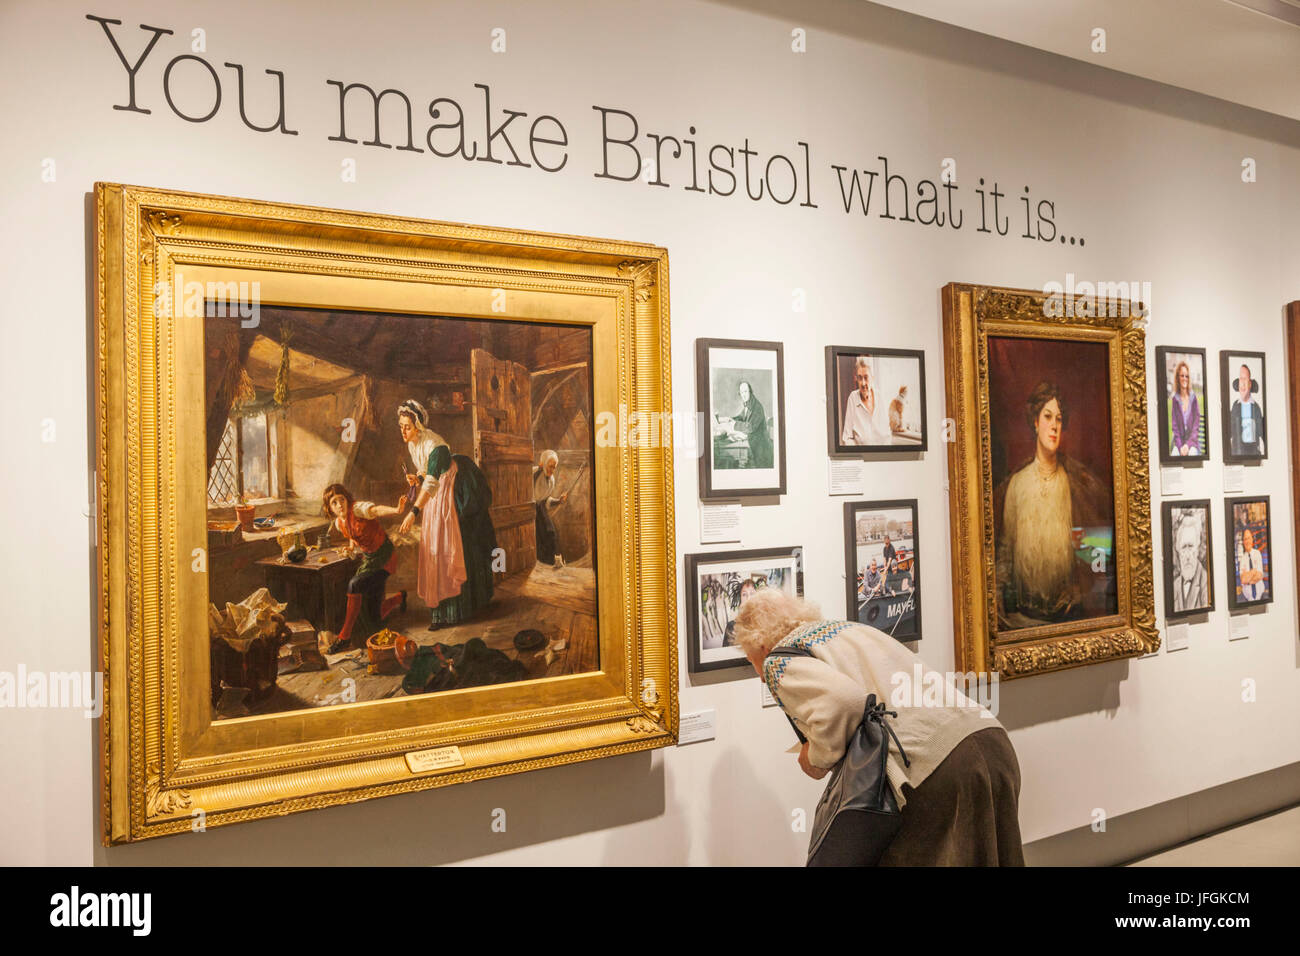 England, Somerset, Bristol, Harbourside, M Shed Museum, Interior Exhibit of Artwork and Photographs Stock Photo